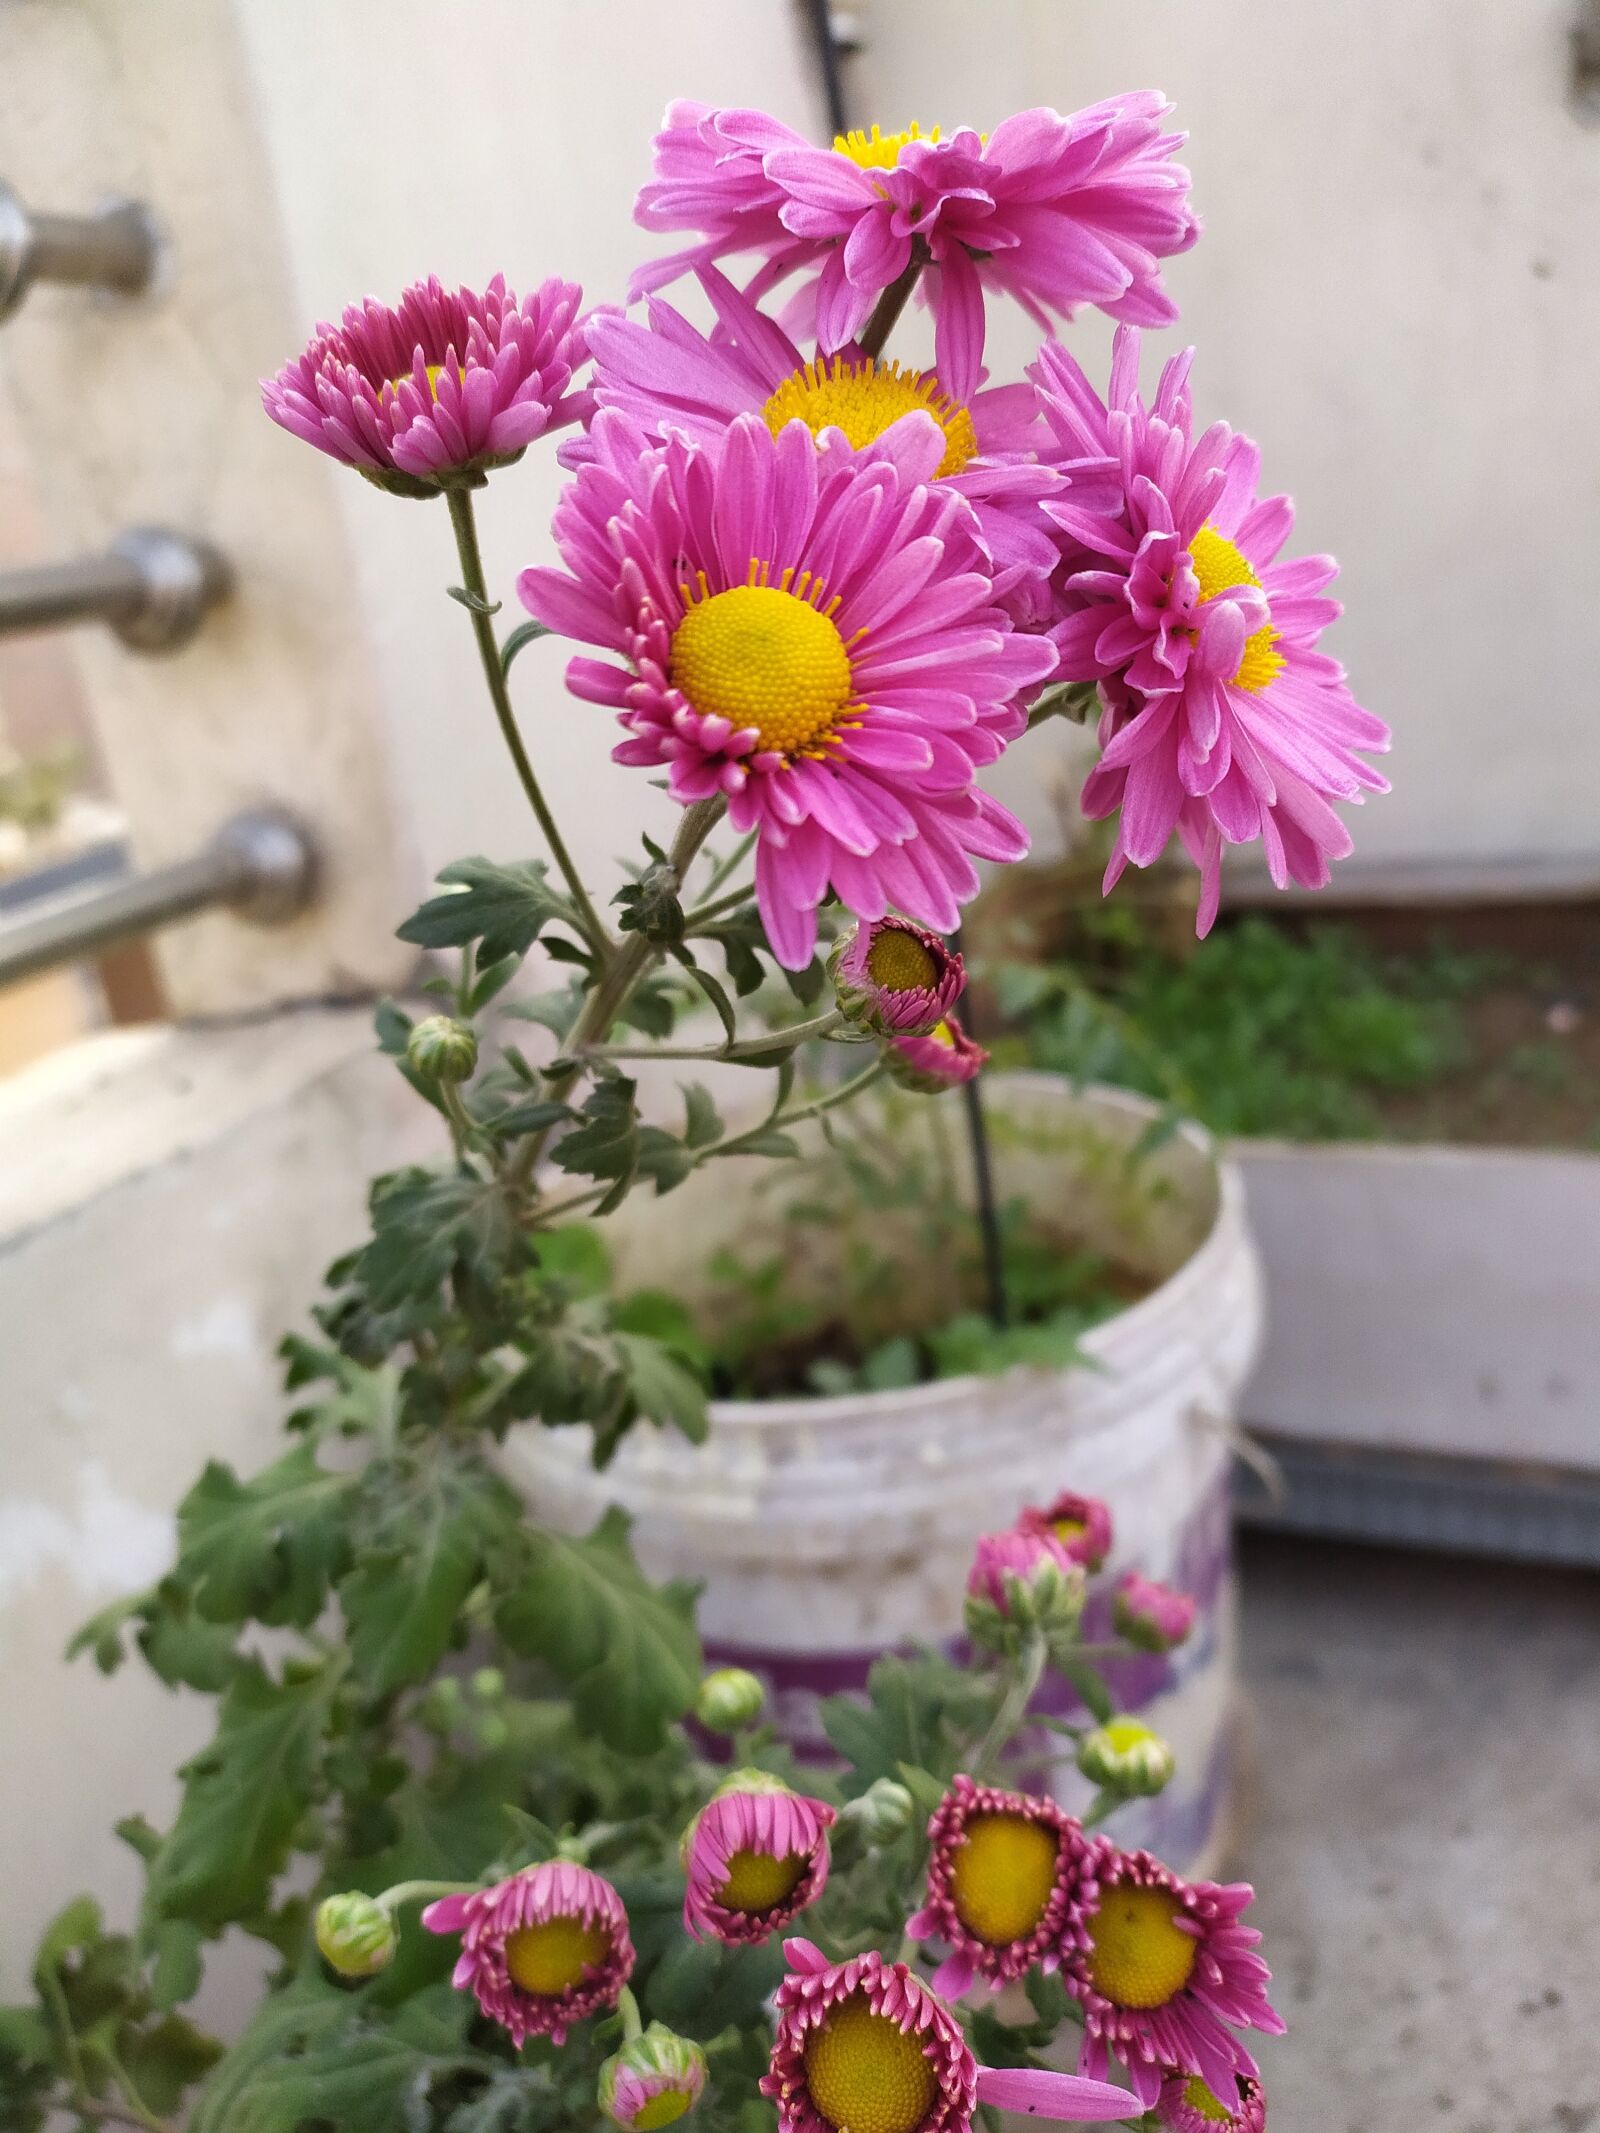 Xiaomi Redmi Note 7S sample photo. Flowers, plant, nature photography